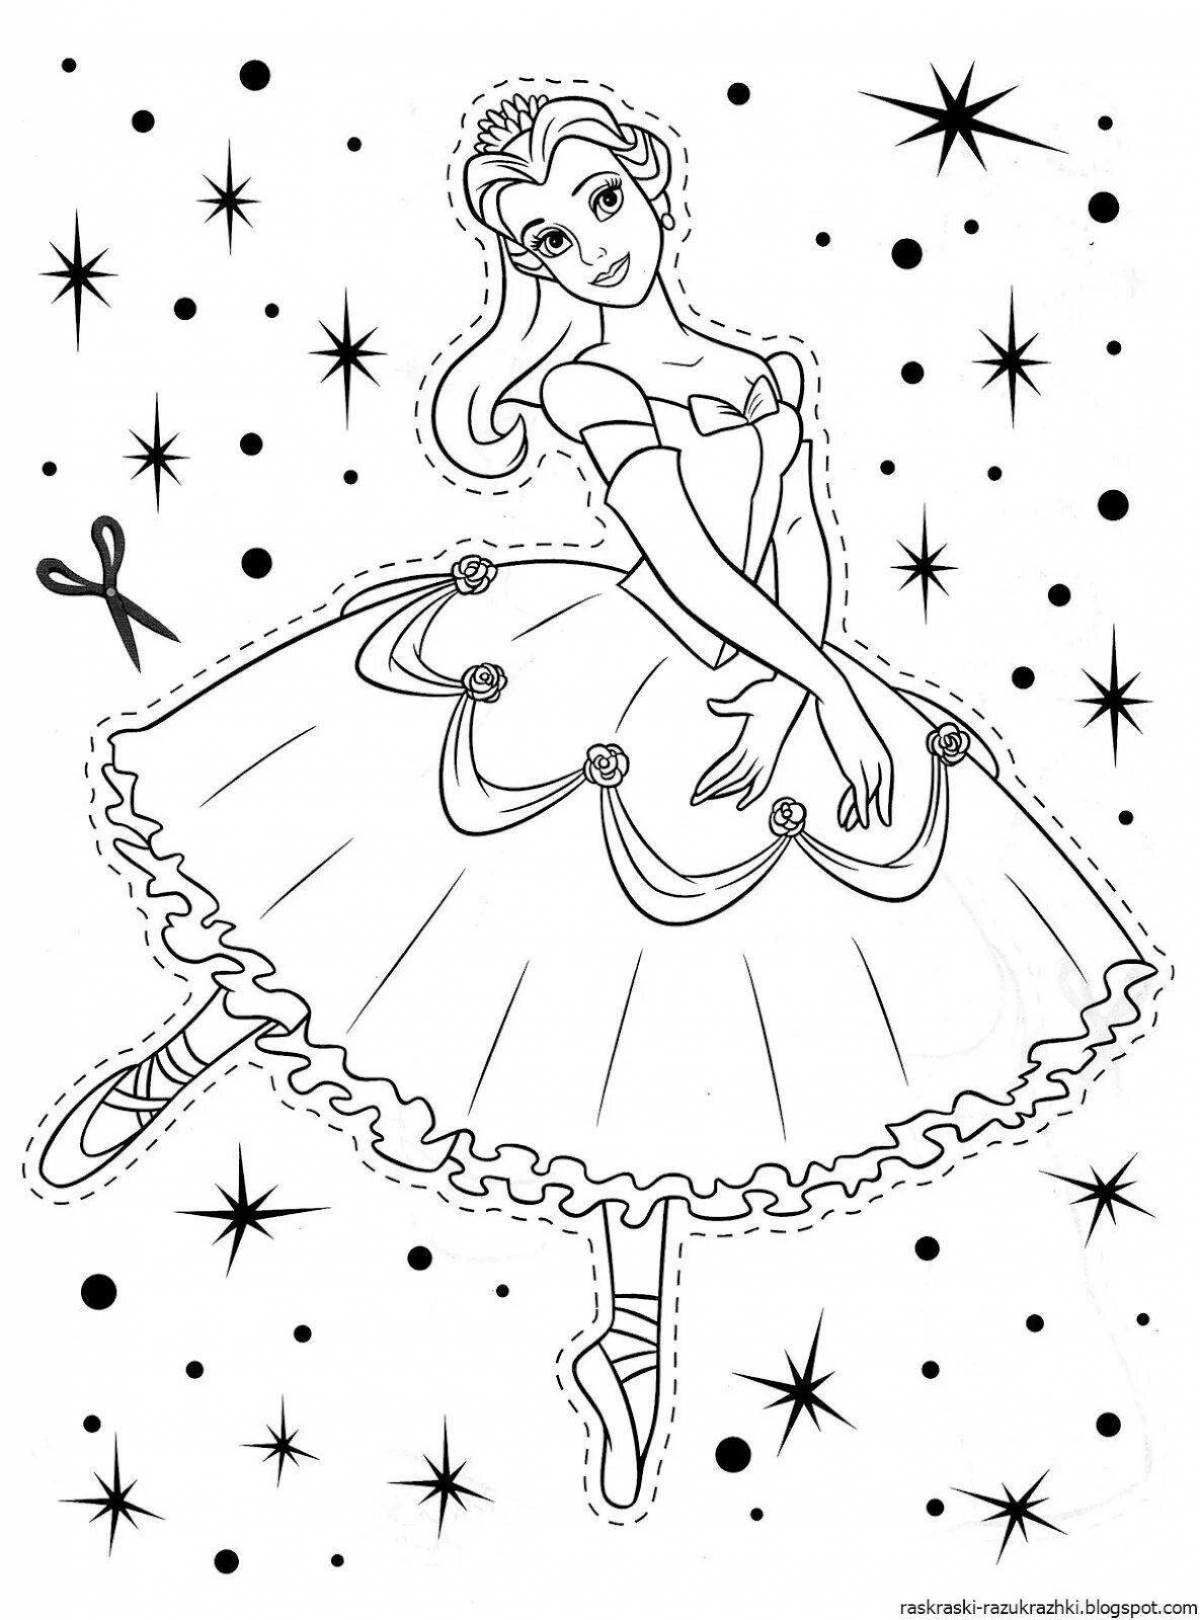 Exalted coloring page for girls 5 years old, princess